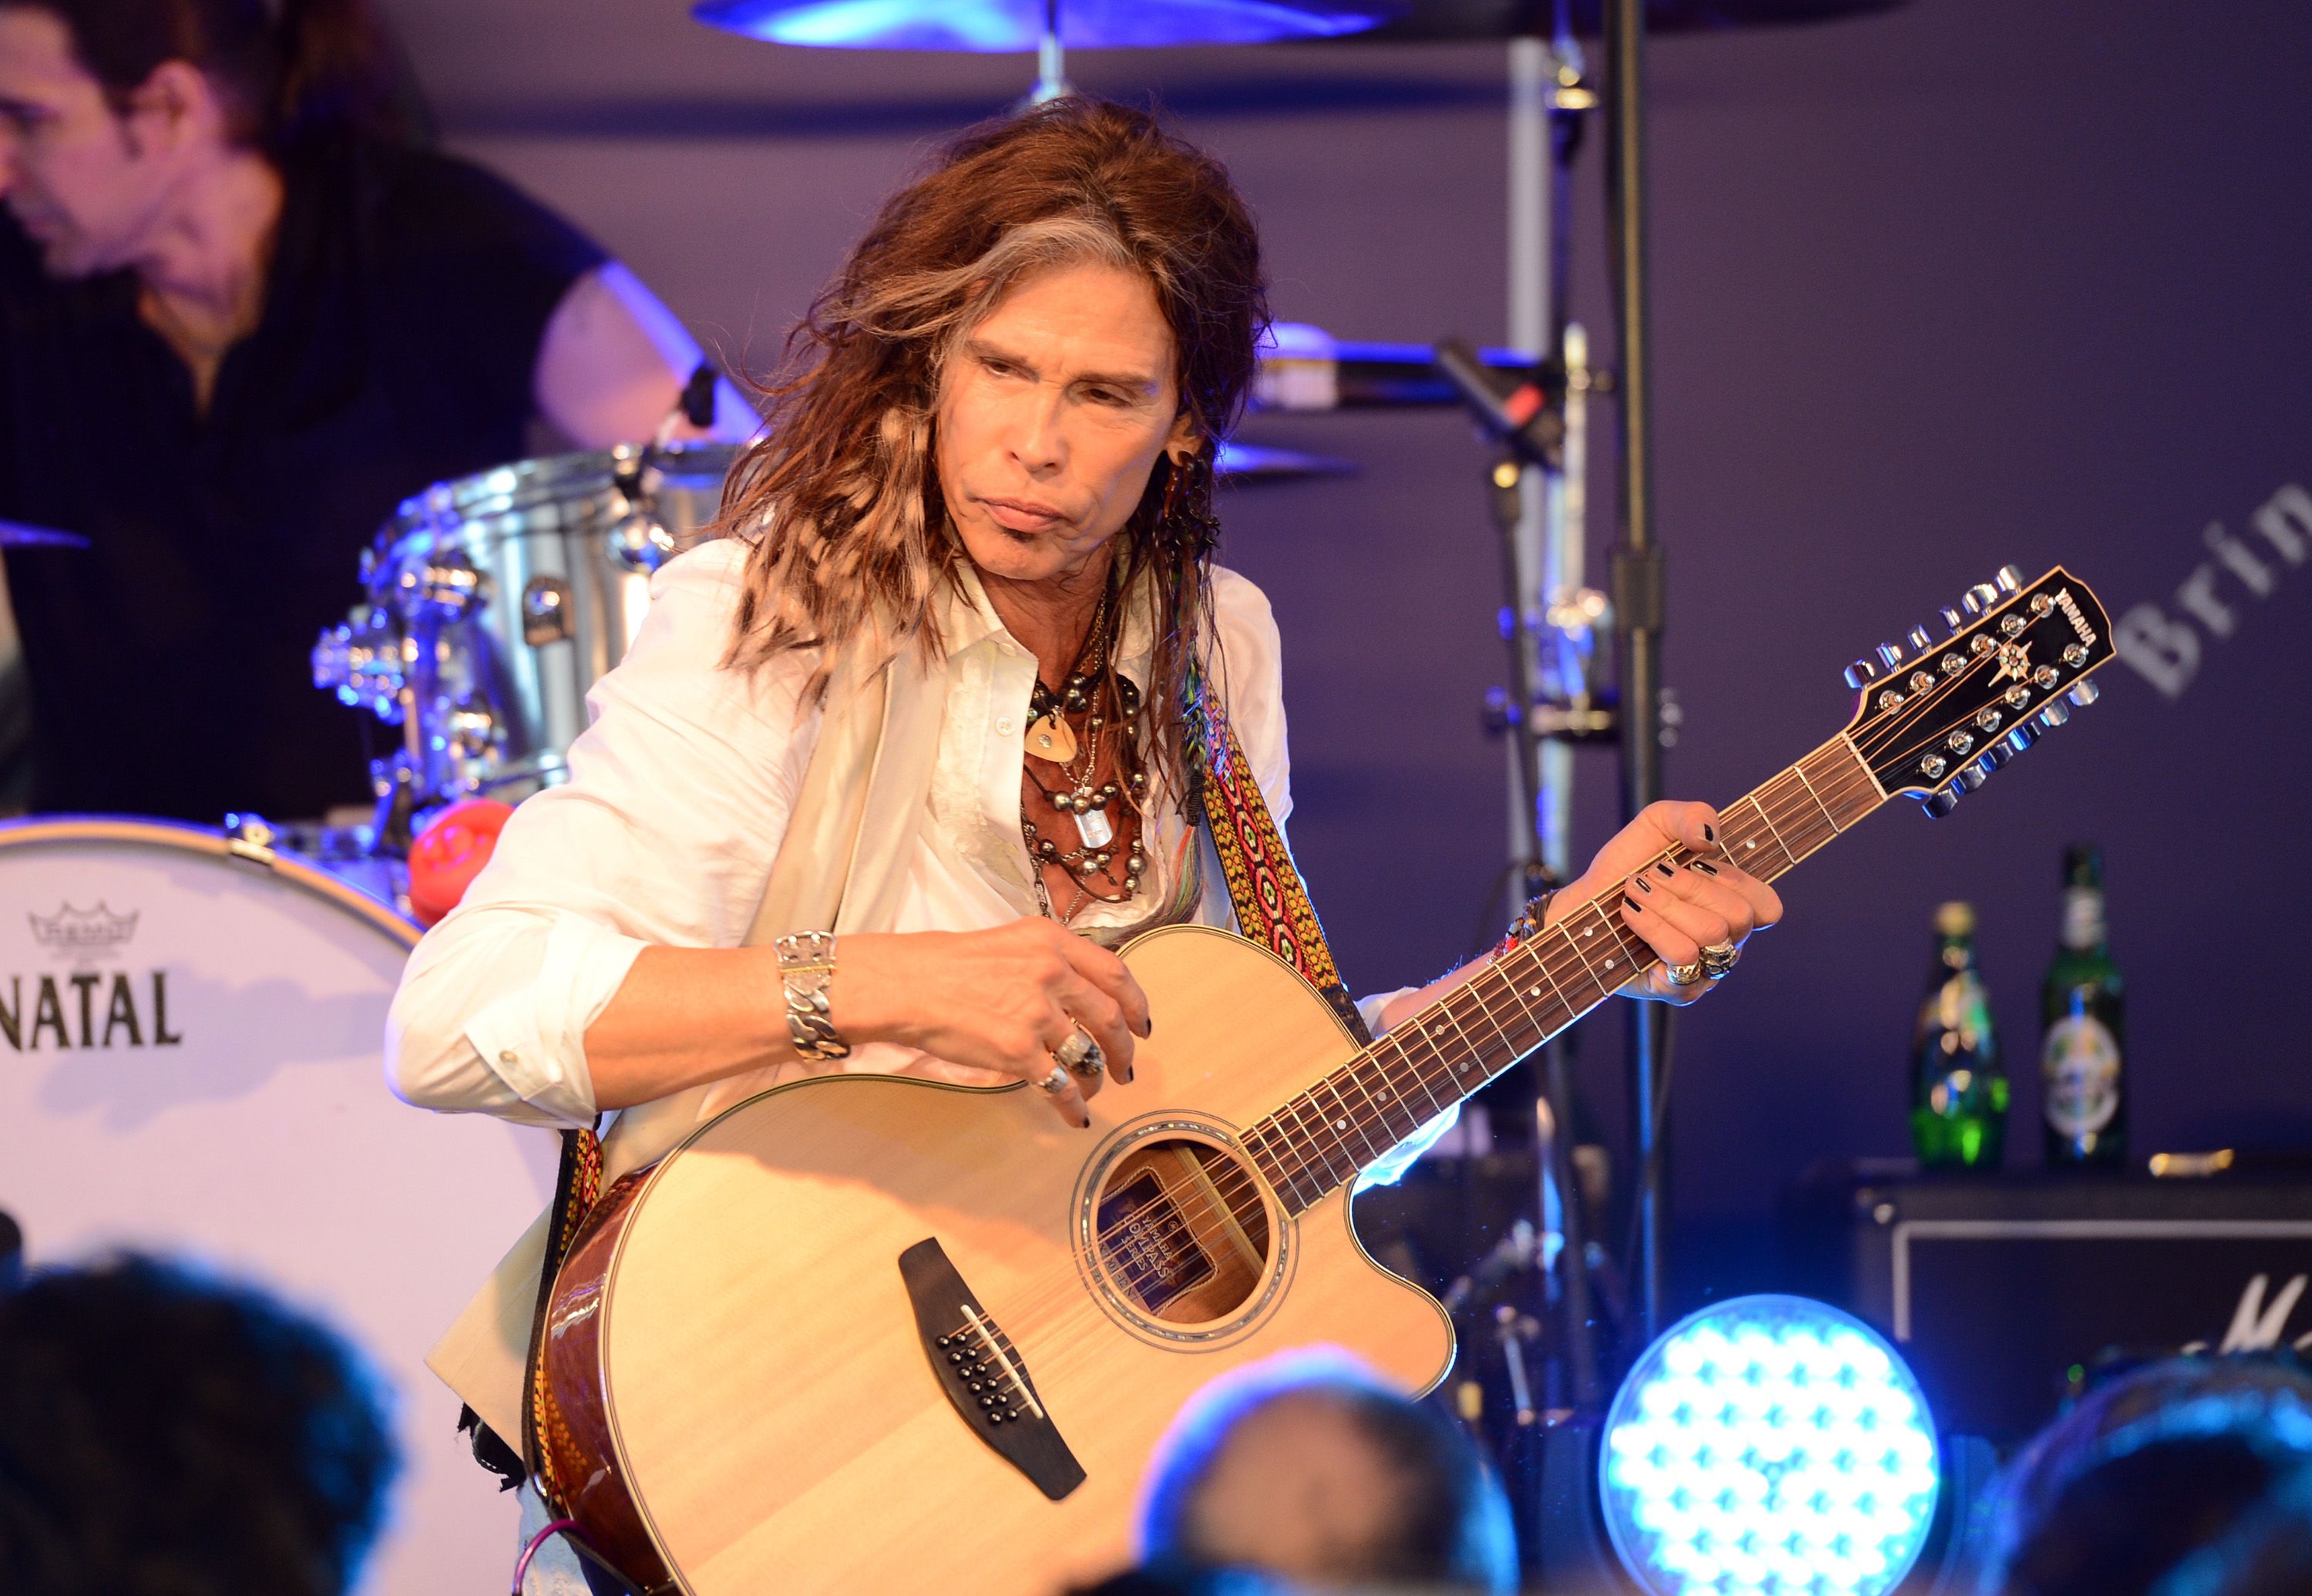 LOS ANGELES, CA - MARCH 10: Musician Steven Tyler of Aerosmith performs onstage the John Varvatos 10th Annual Stuart House Benefit presented by Chrysler, Kids Tent by Hasbro Studios, at John Varvatos Los Angeles on March 10, 2013 in Los Angeles, California. (Photo by Jason Merritt/Getty Images for John Varvatos)